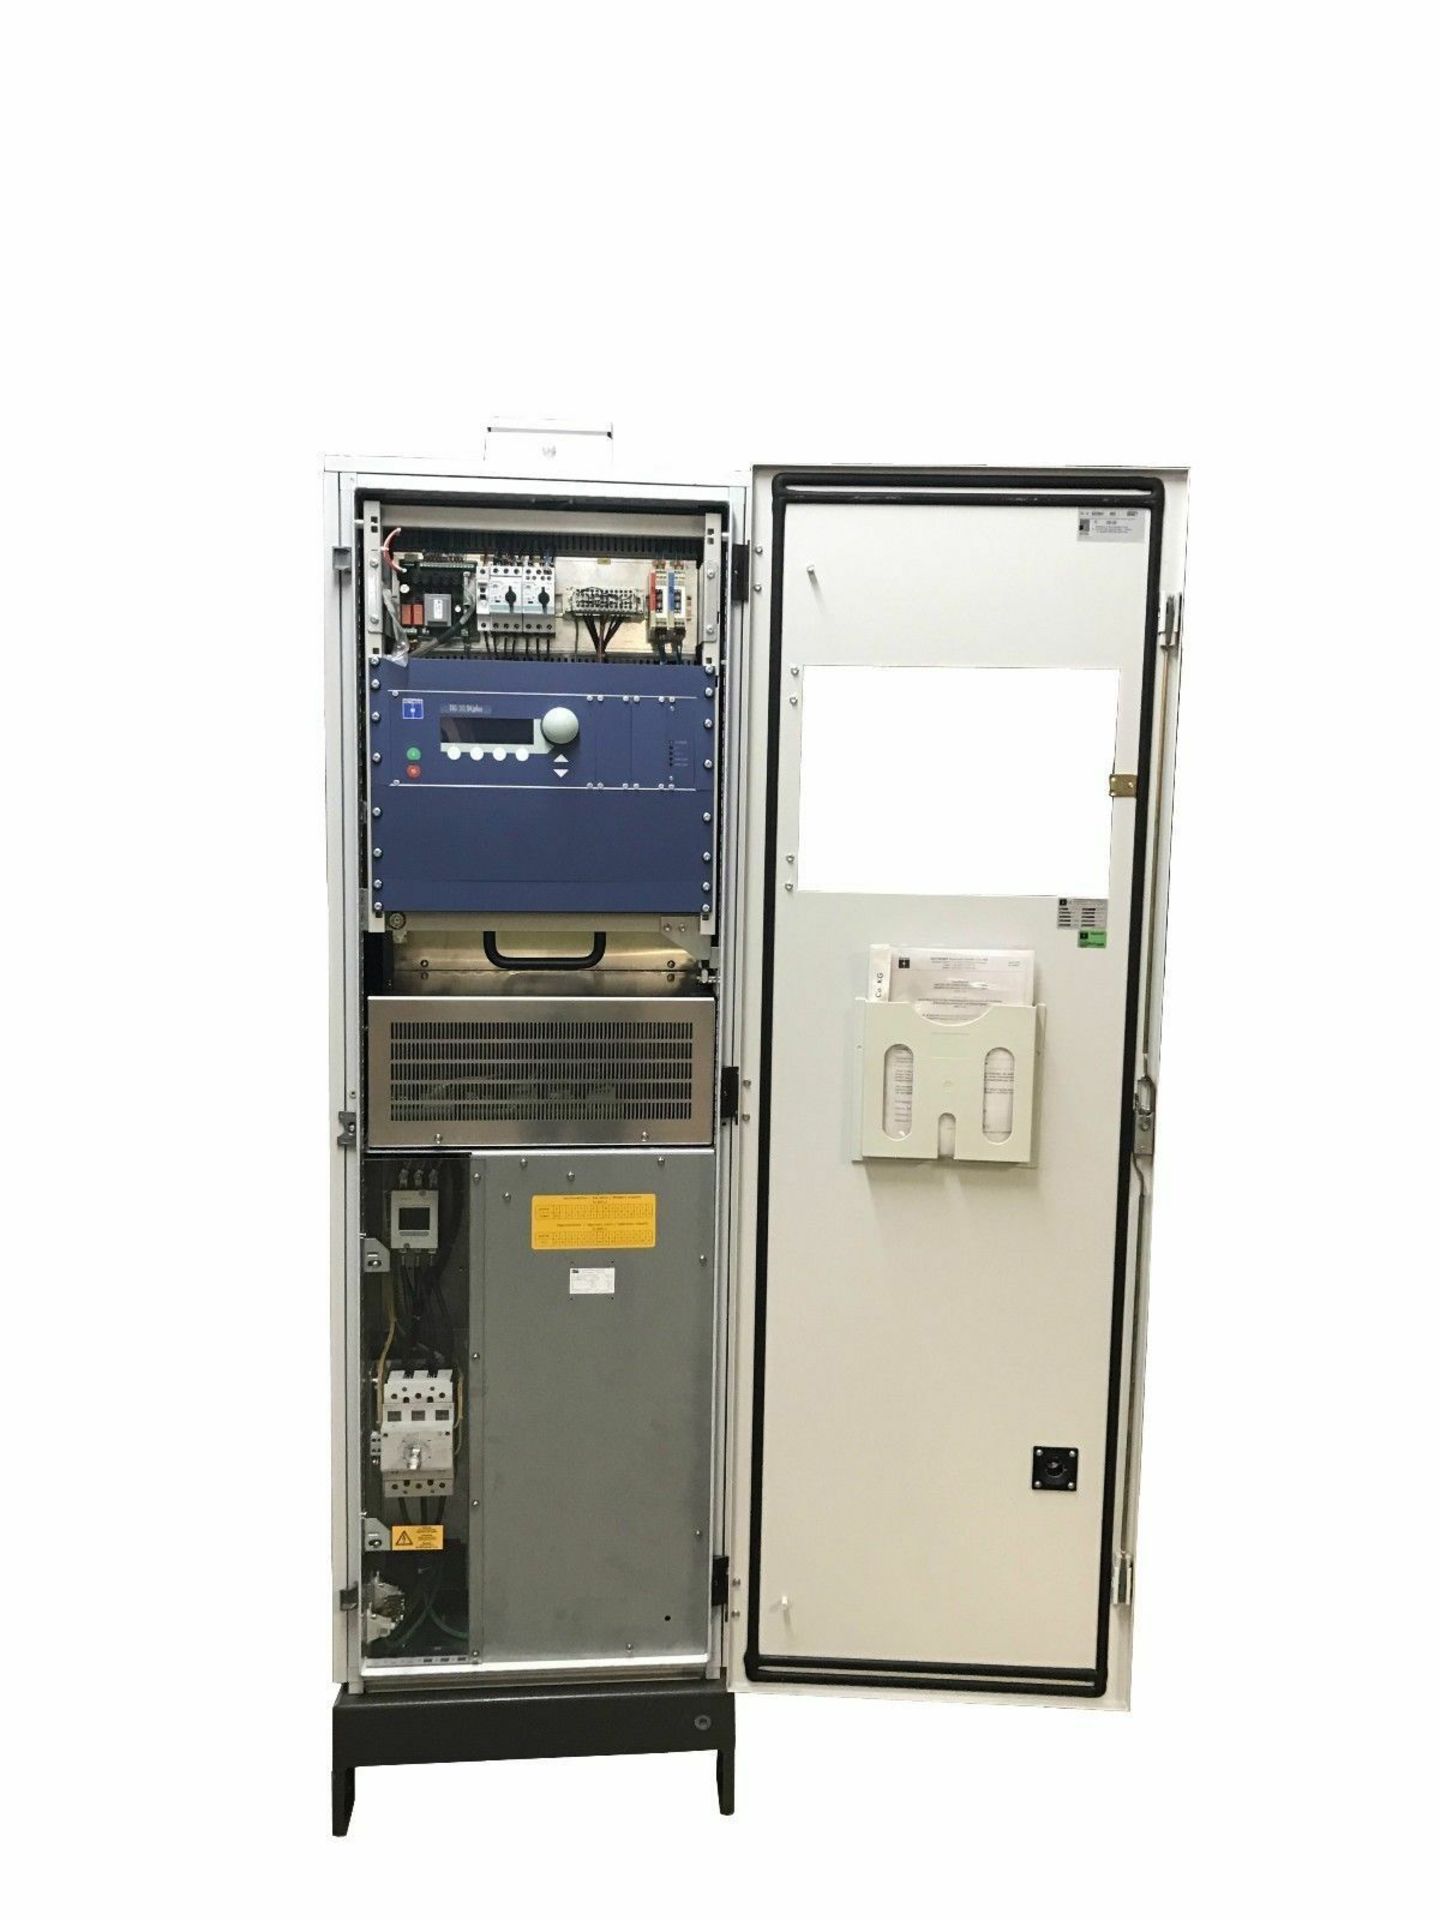 NEW IN CRATE -TRUMPF HUTTINGER ELEKTRONIK GMBH TIG 30 DC PLUS 400V 48A 30KW POWER SUPPLY - Image 2 of 5